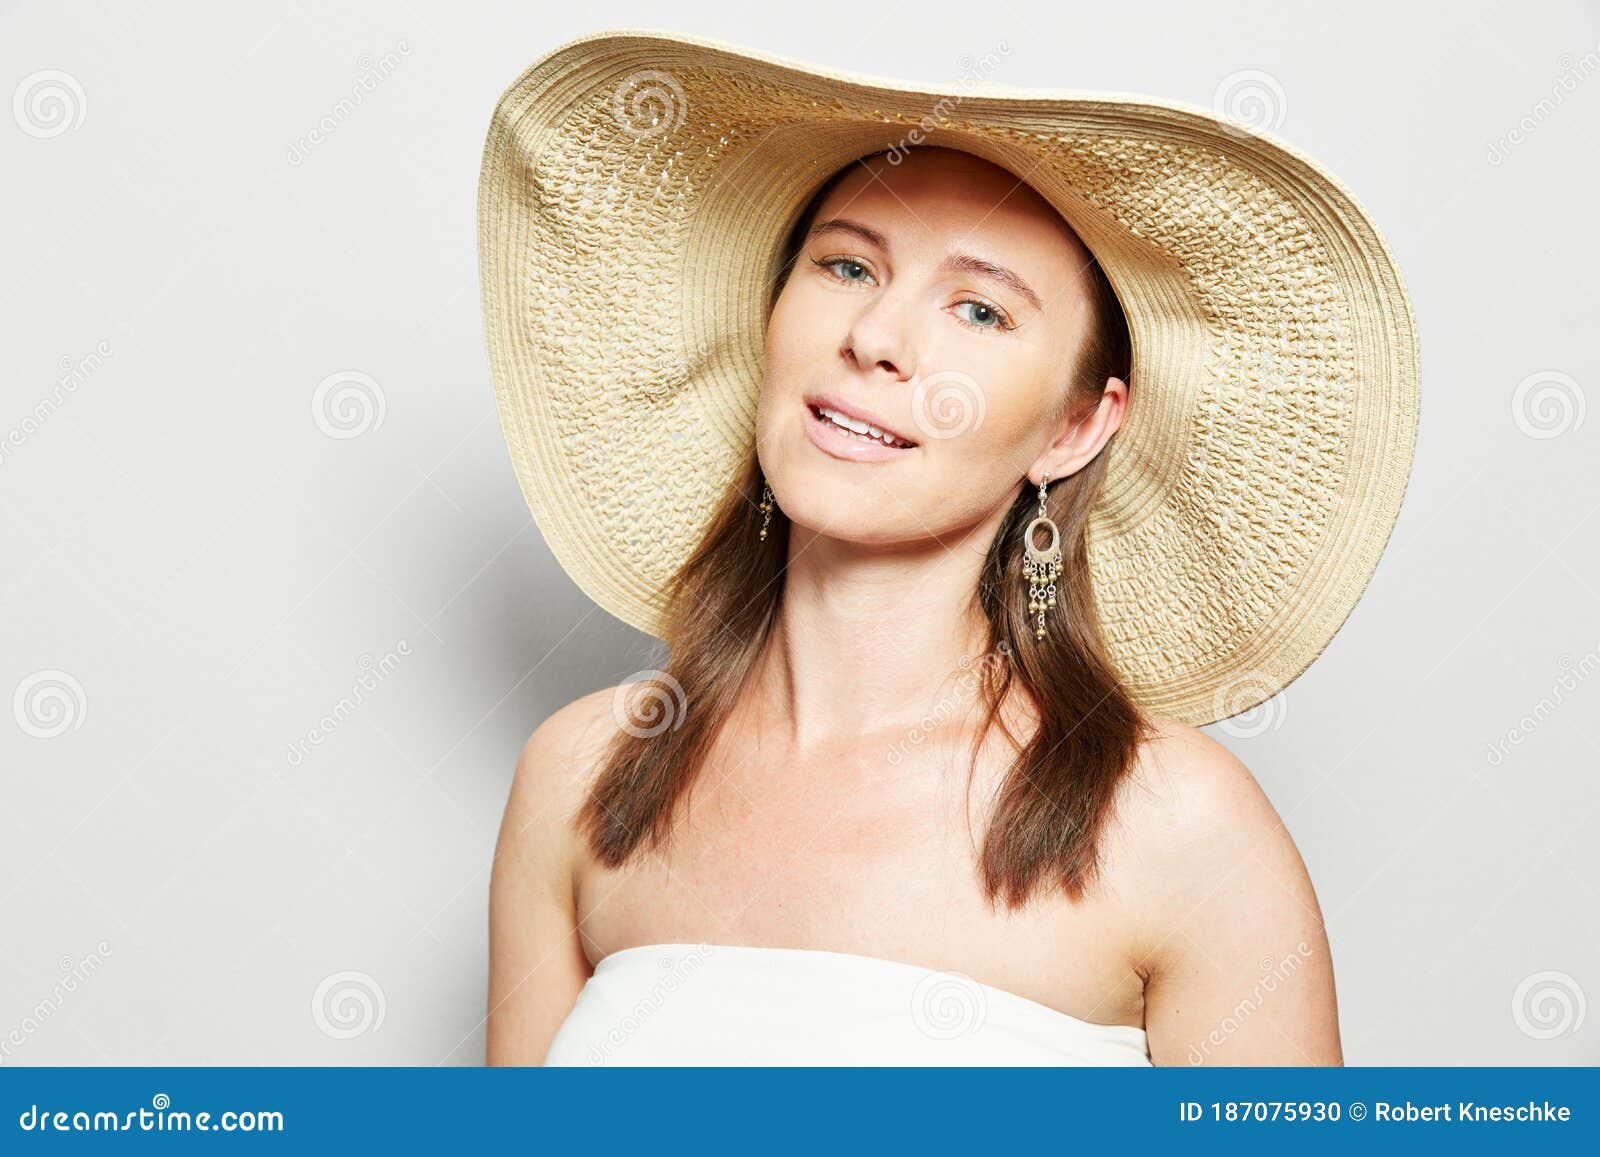 Happy African Woman Wearing Straw Hat With A Wide Brim Stock Image Image Of  Feminine, Cheerful: 227068417